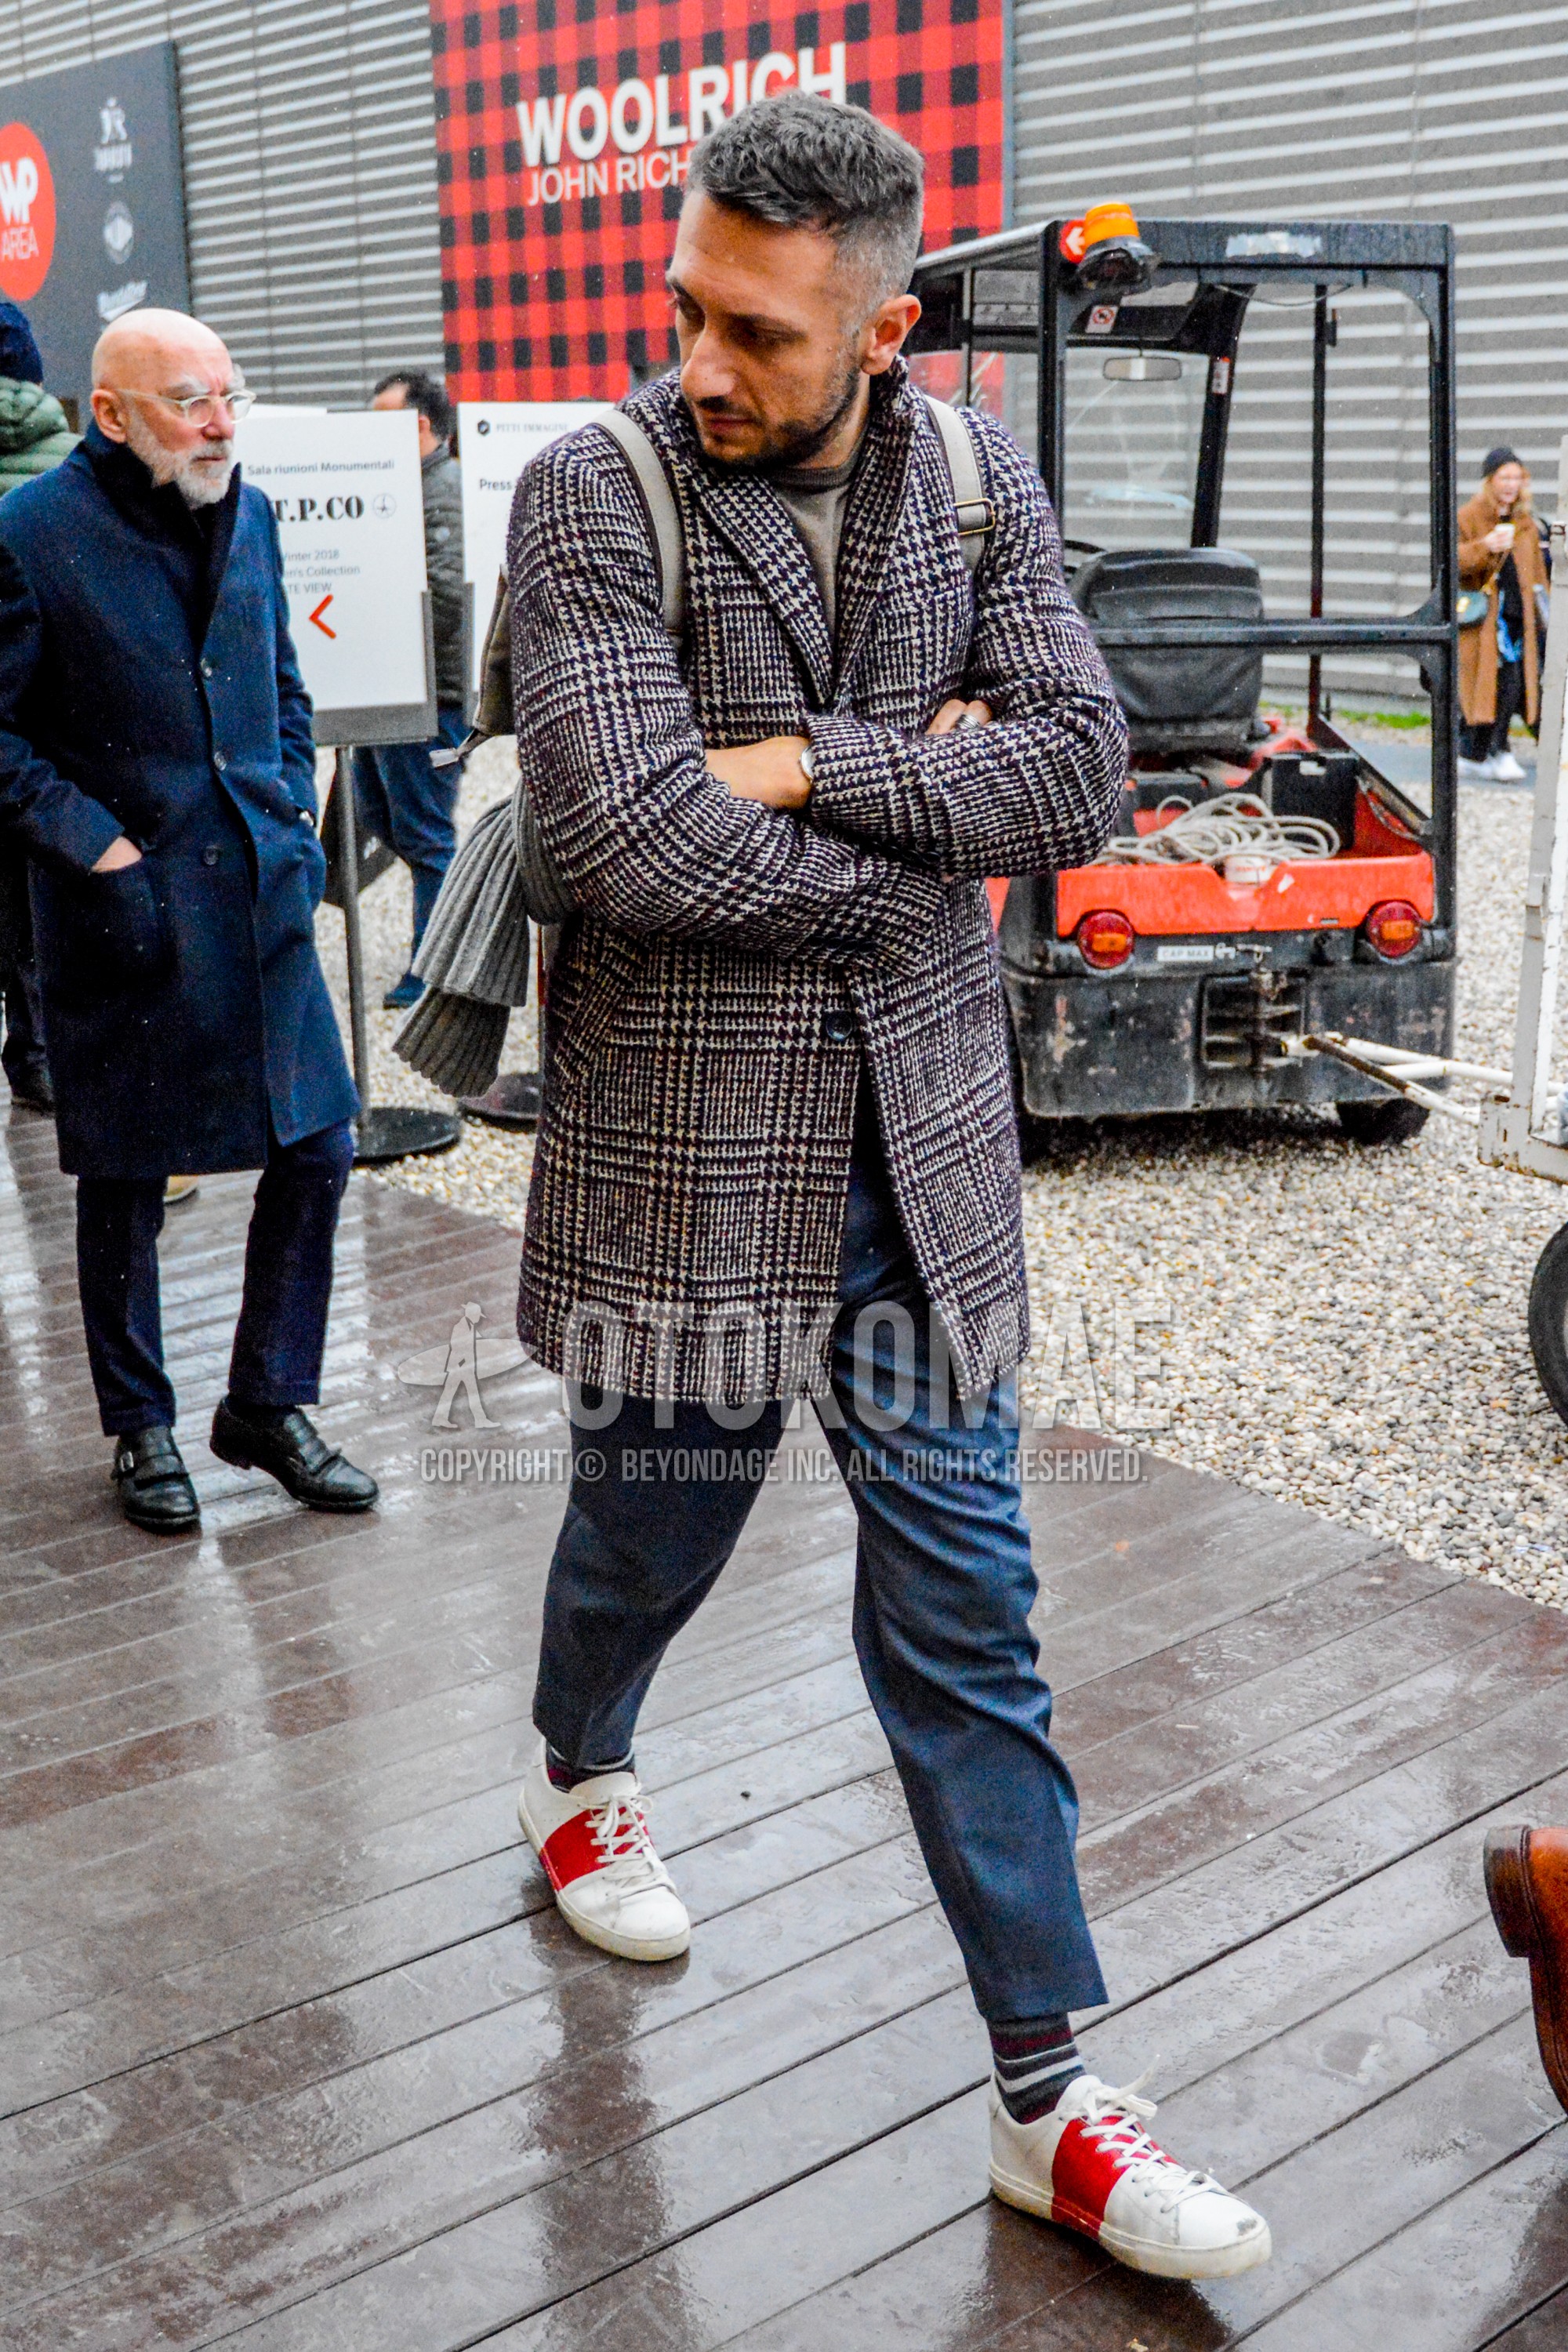 Men's autumn winter outfit with brown check chester coat, gray plain t-shirt, gray plain slacks, multi-color horizontal stripes socks, white red low-cut sneakers.